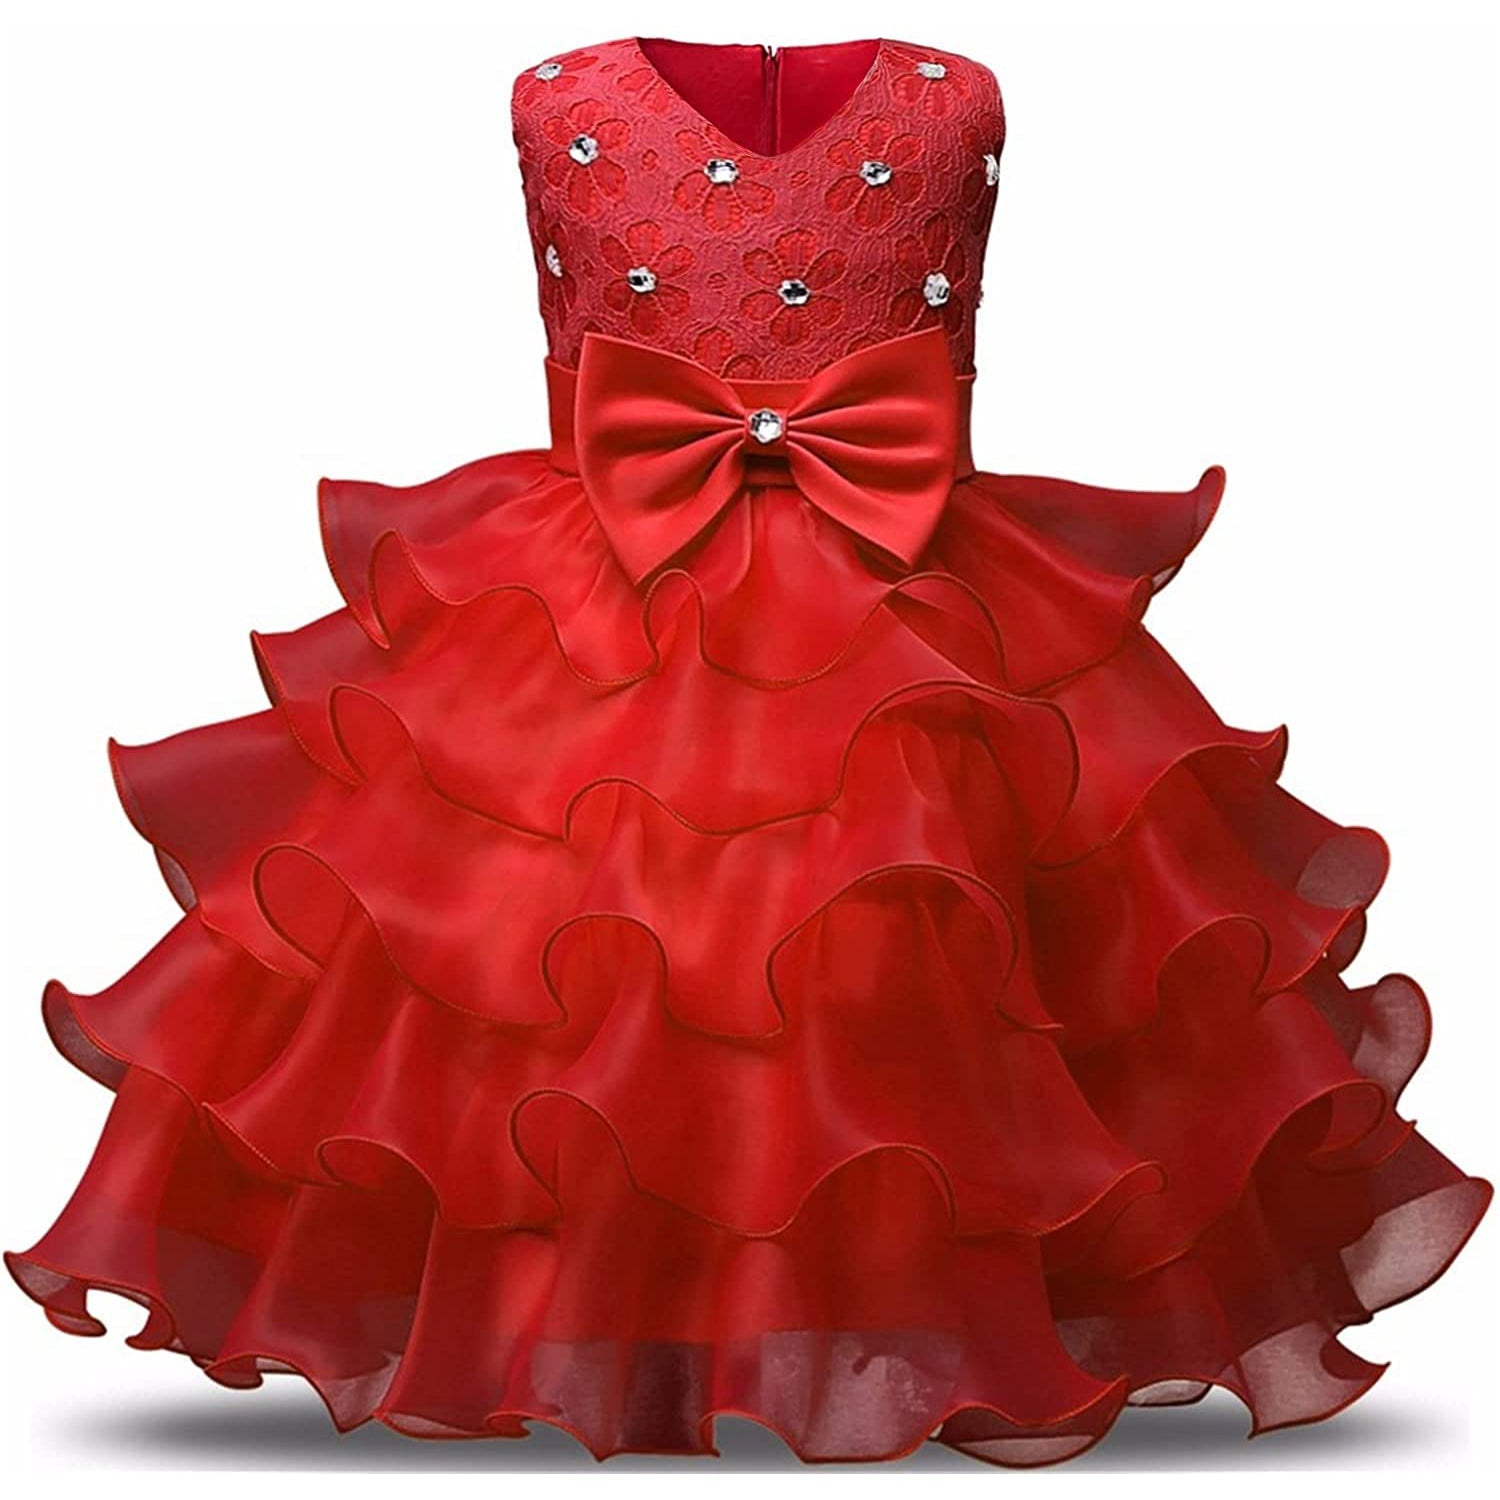 Hoity Moppet So Chaud Embellished Gown | Kids, Girls, Gowns, Red, 3d  Sequin, Round Neckline, Full | Embellished gown, Gowns for girls, Gowns